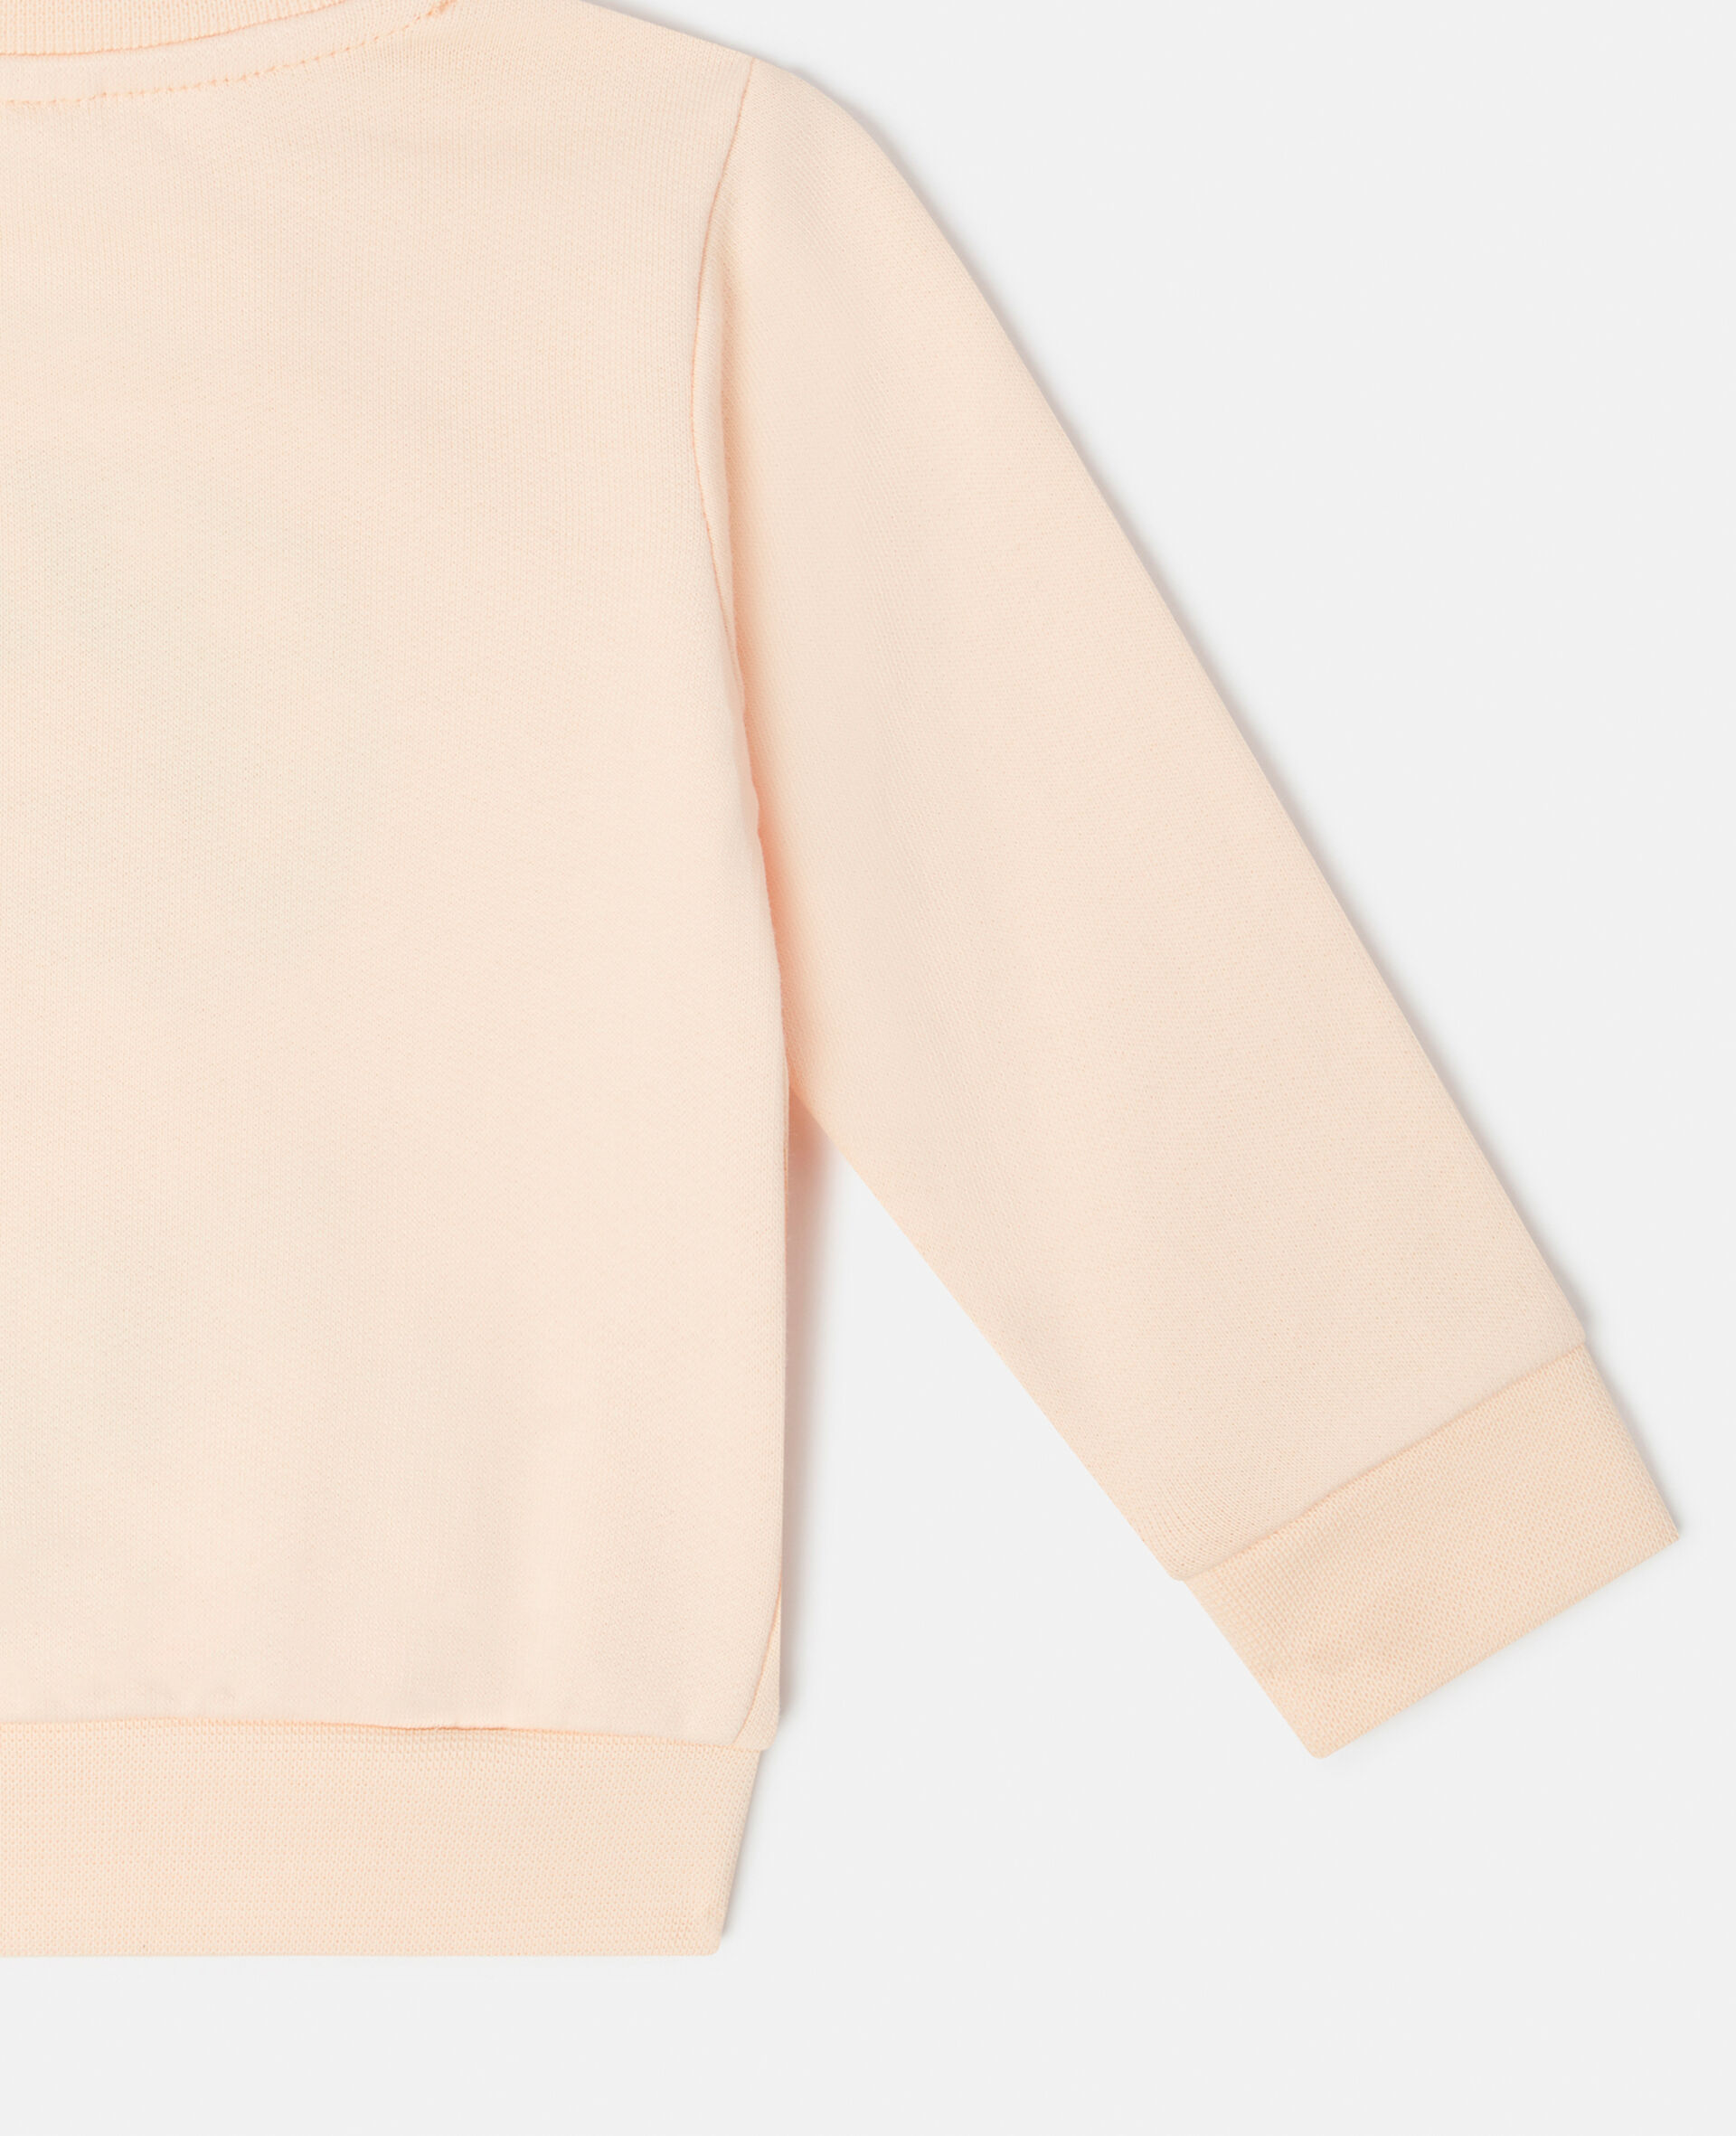 'S' Embroidery Sweatshirt-Pink-large image number 3